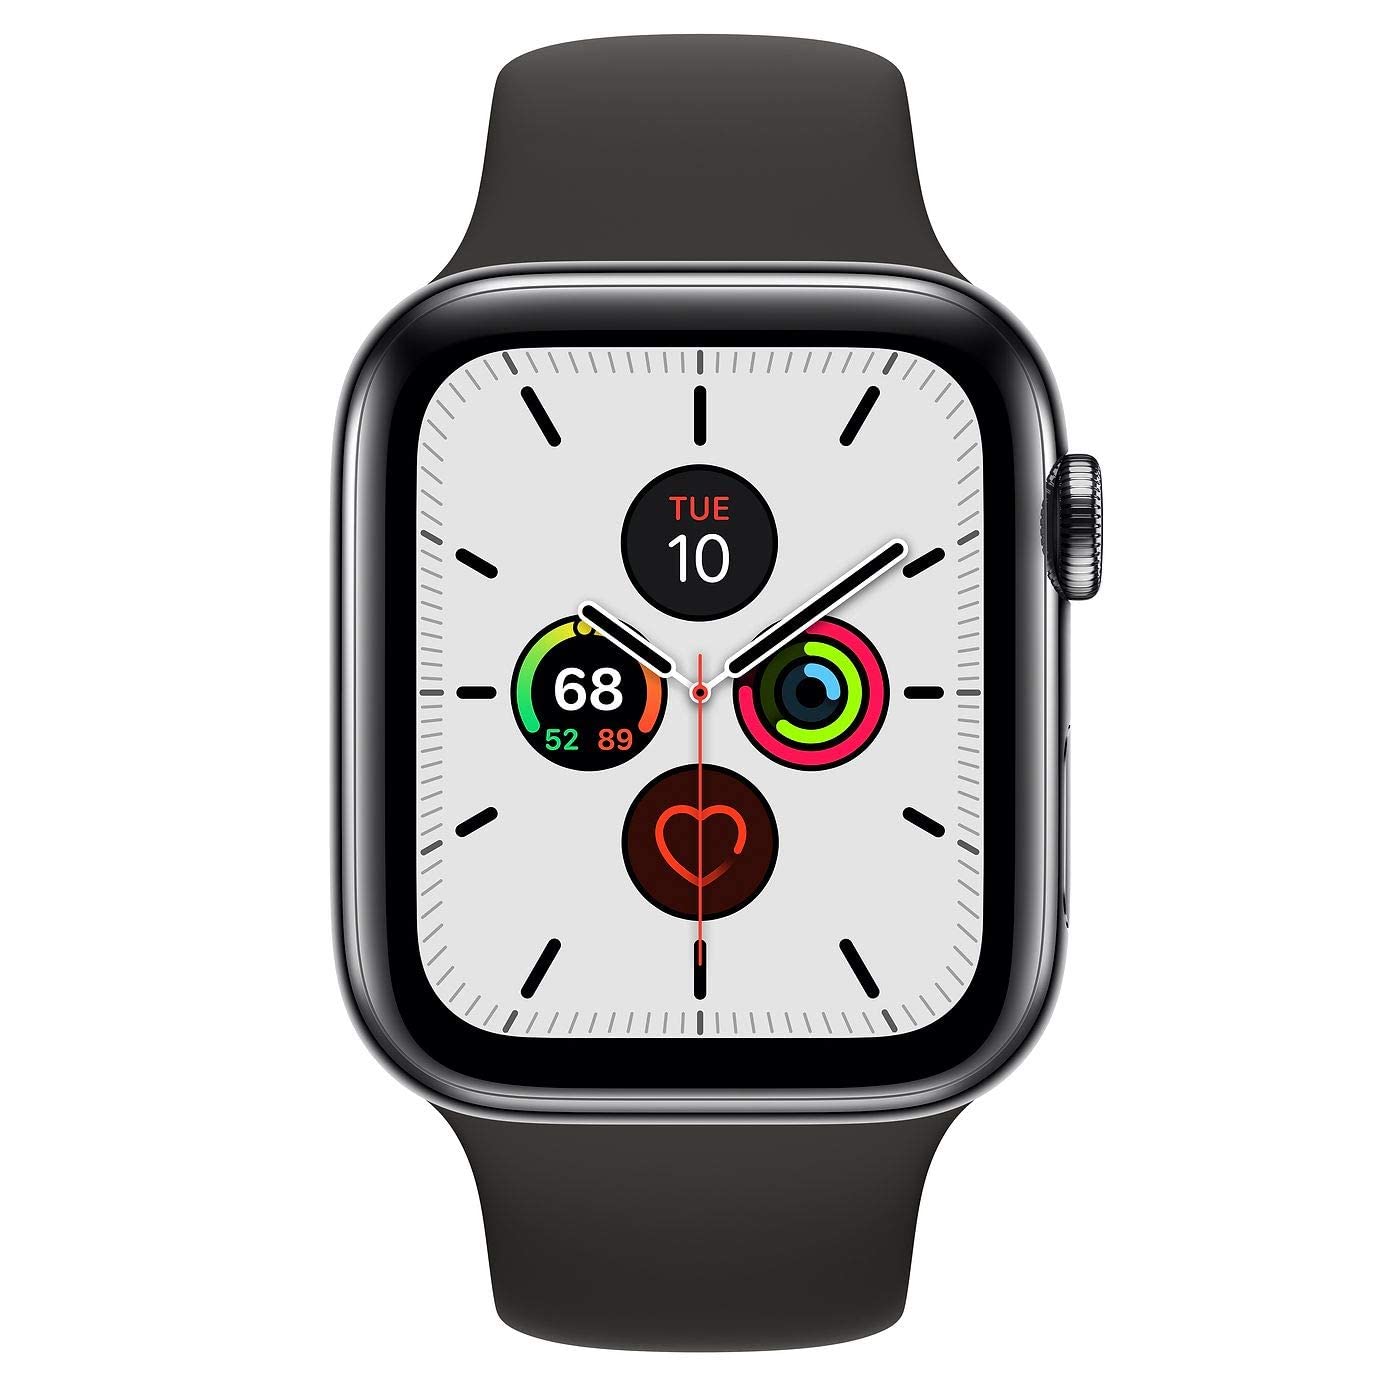 Apple Watch Series 5 (GPS + Cellular, 44MM) Space Black Stainless Steel Case with Black Sport Band (Renewed)